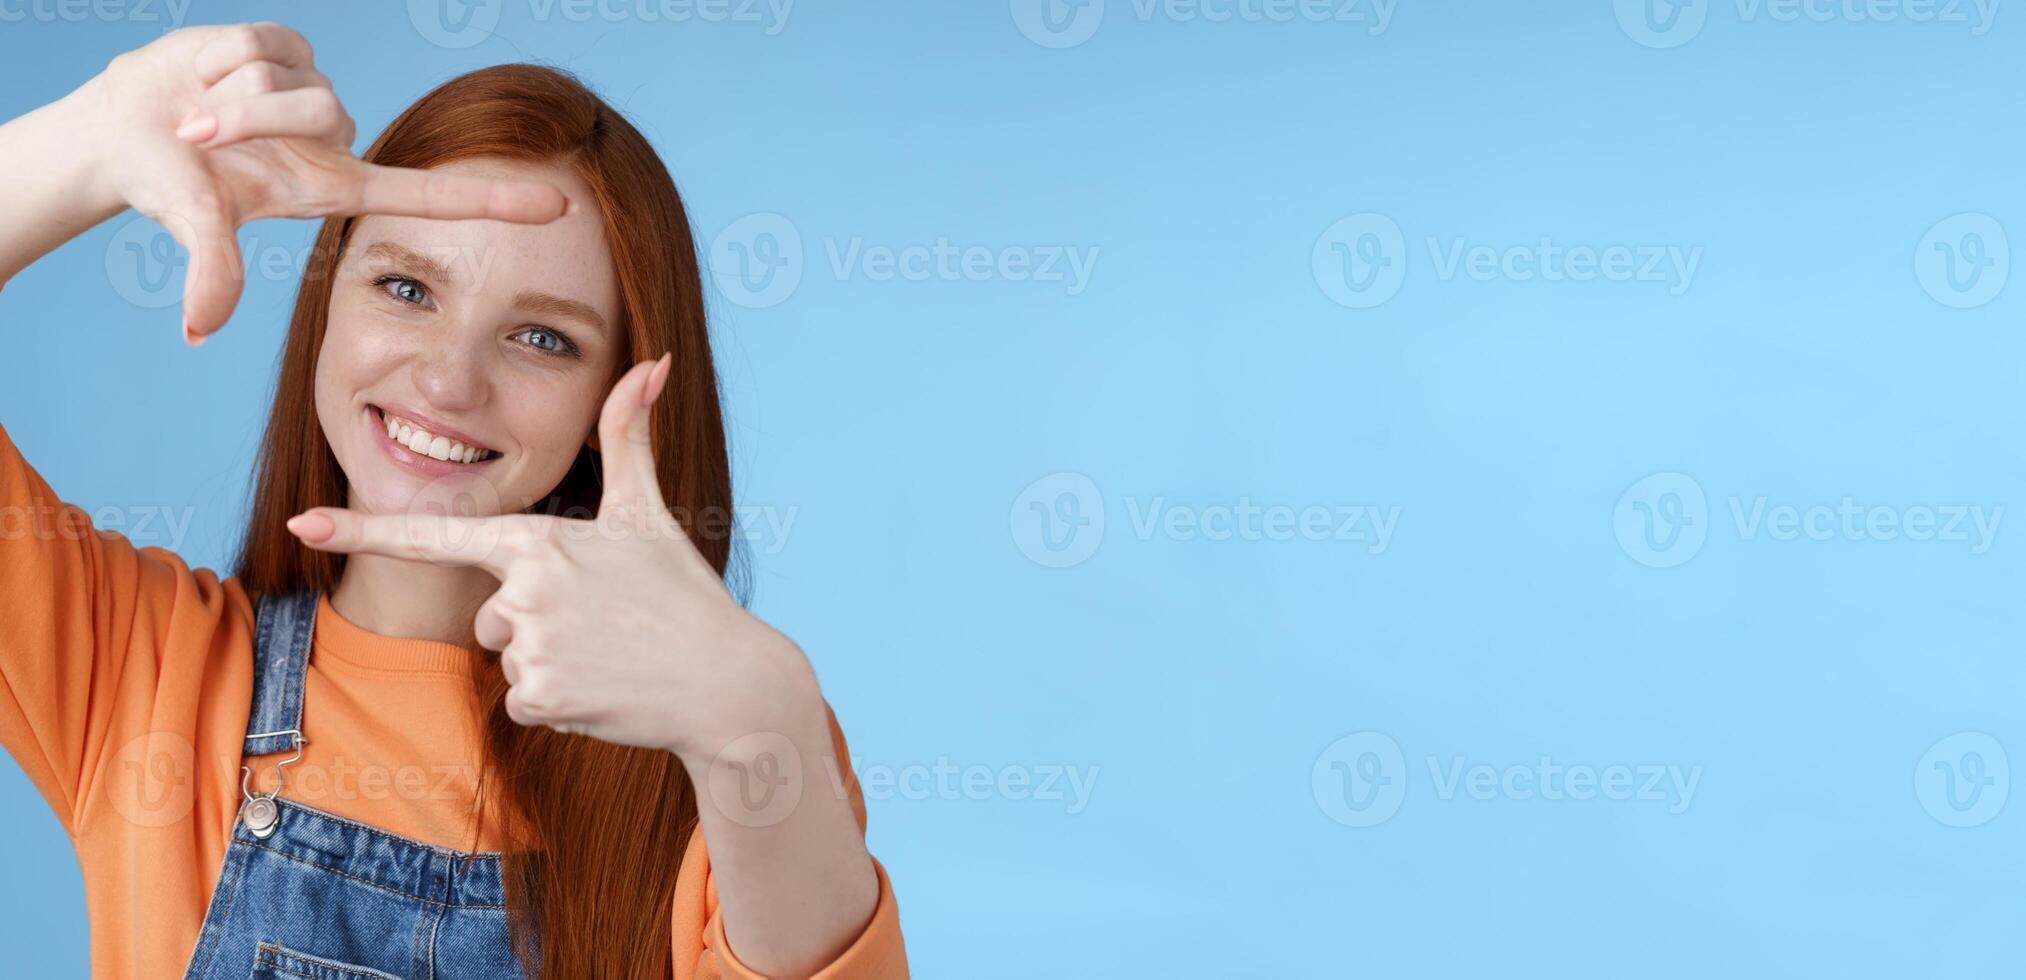 Joyful attractive sincere redhead young girl searching inspiration find perfect angle take good shot make hand frames look through delighted amused smiling broadly white teeth, blue background photo